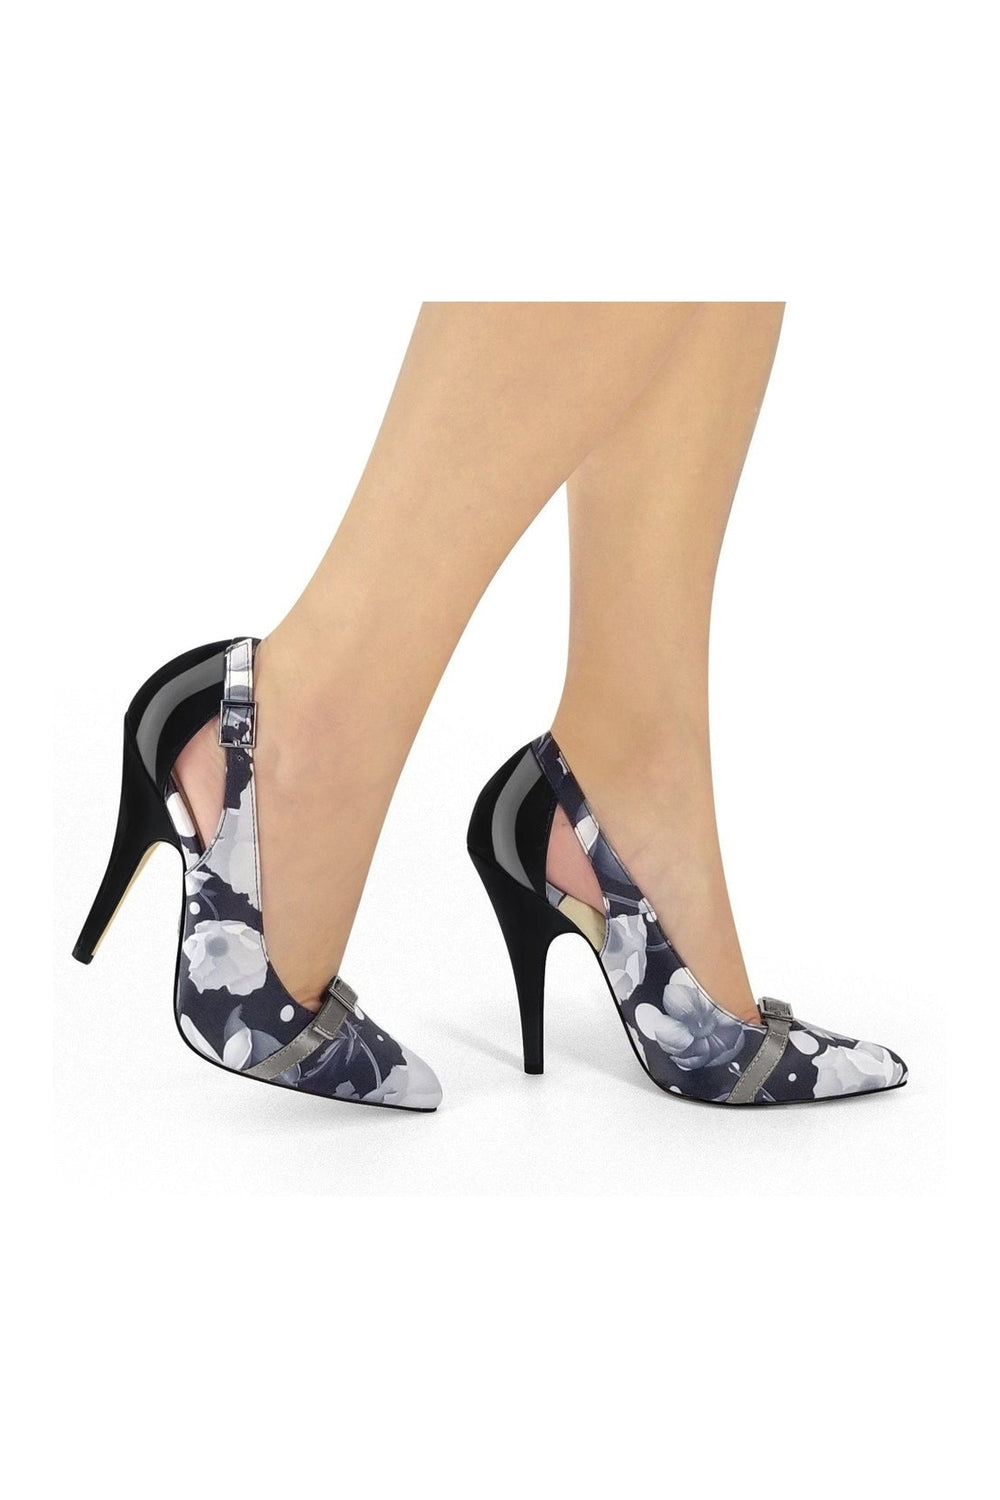 Flirty Floral Printed Pump with Buckle Detail-Pumps-Sexyshoes Signature-Black-SEXYSHOES.COM